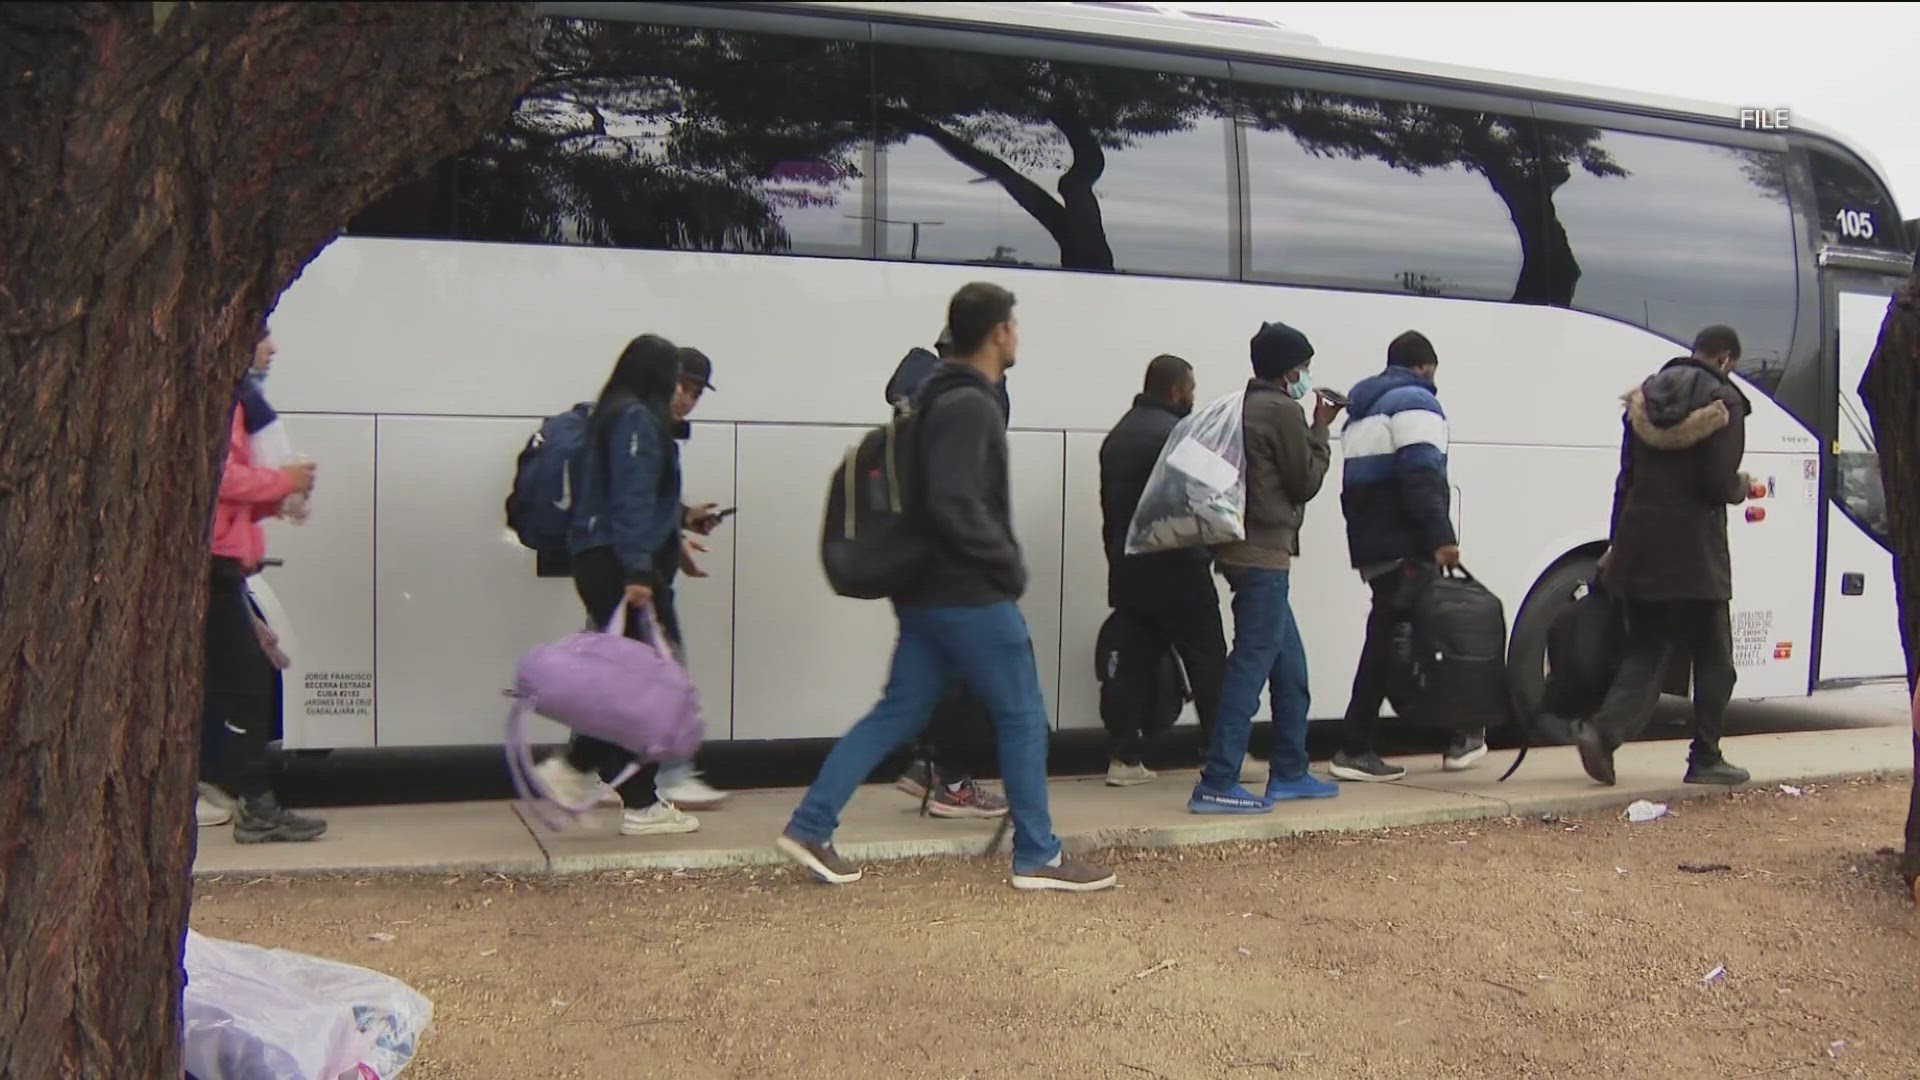 County leaders say more than 100,000 migrants seeking asylum have arrived in San Diego over the past six months.